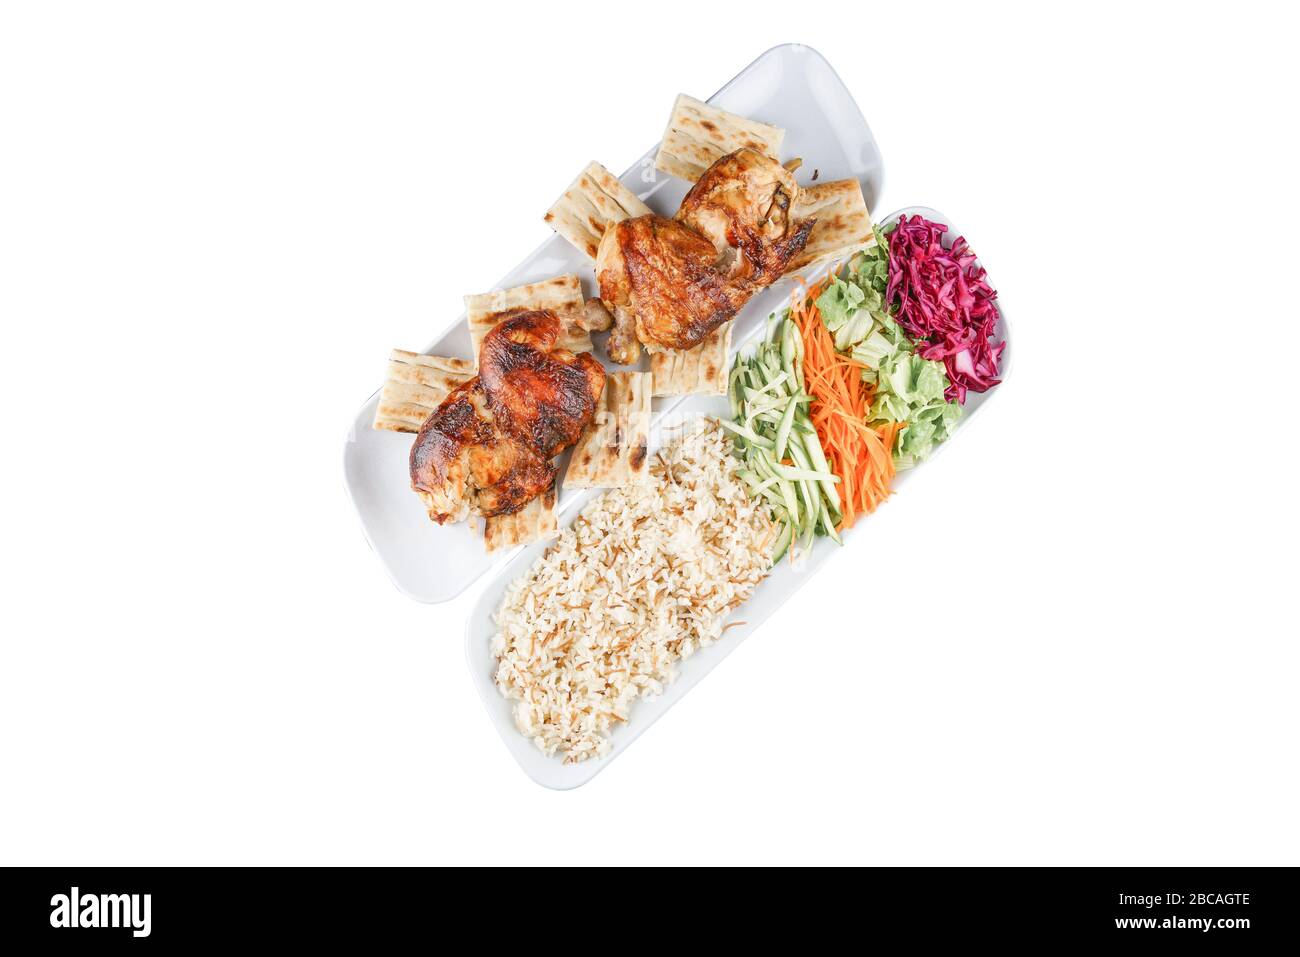 Baken oven chicken and salad and rice Stock Photo